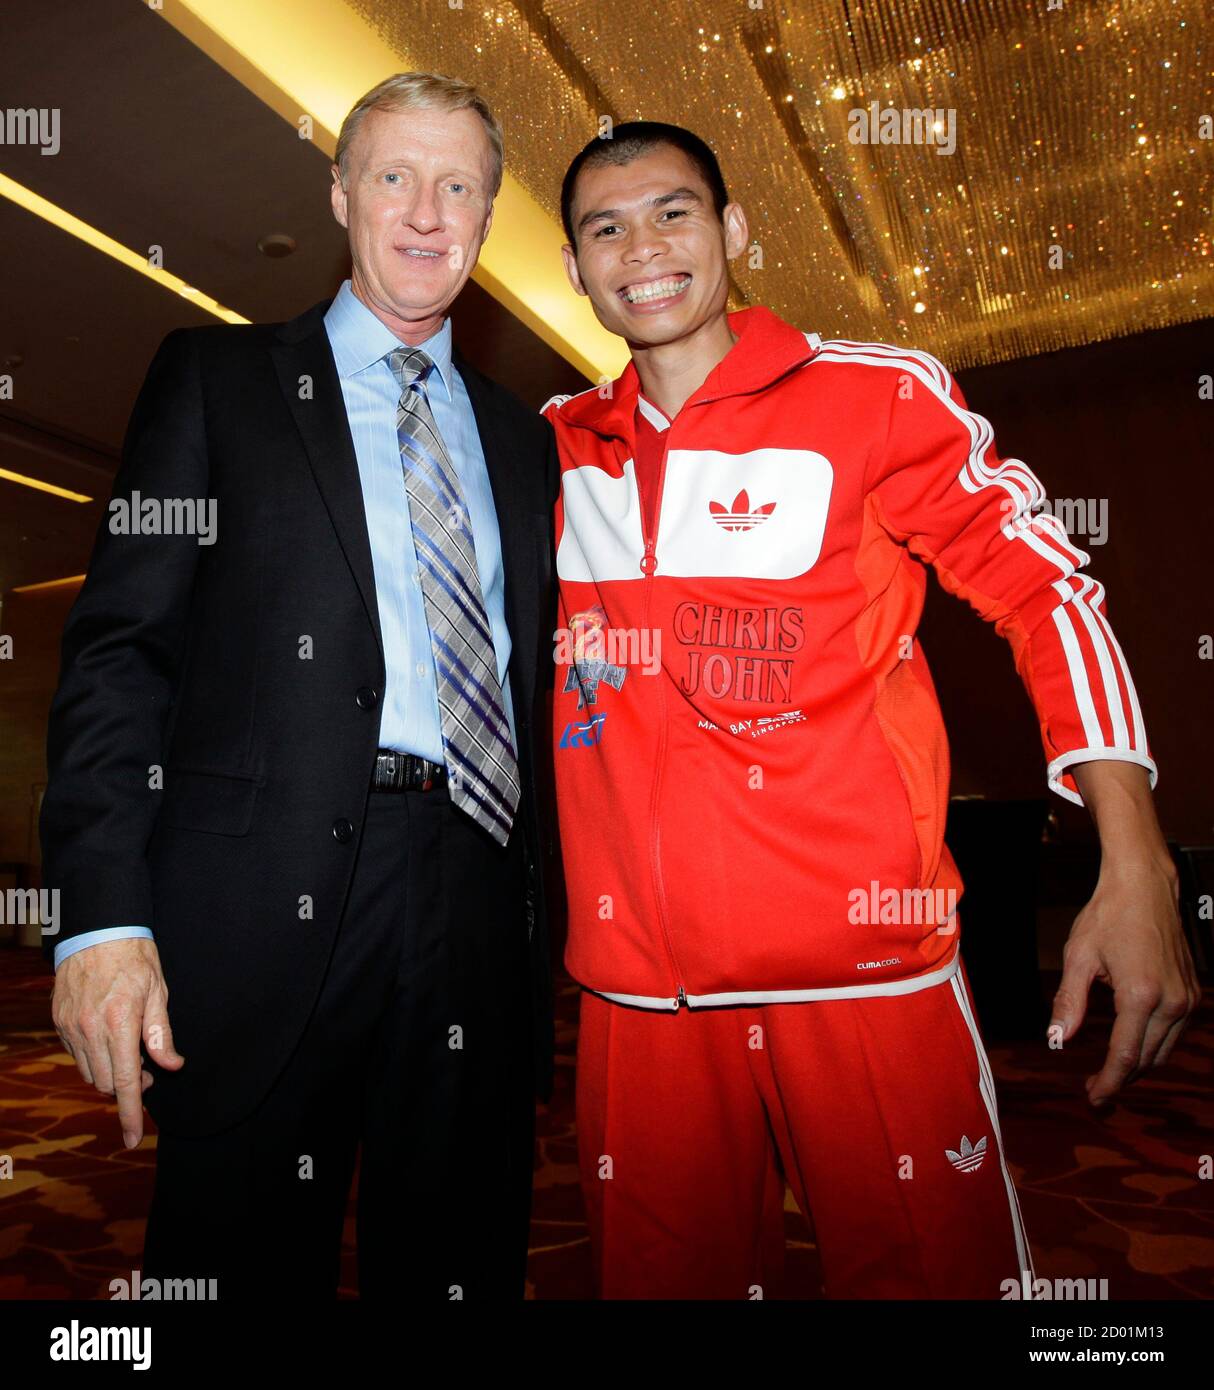 Boxer Chris John (R) of Indonesia, the undefeated World Boxing Association  (WBA) super featherweight world champion, poses for souvenir photos with  U.S. boxing ring announcer Jimmy Lennon Jr. after a news conference